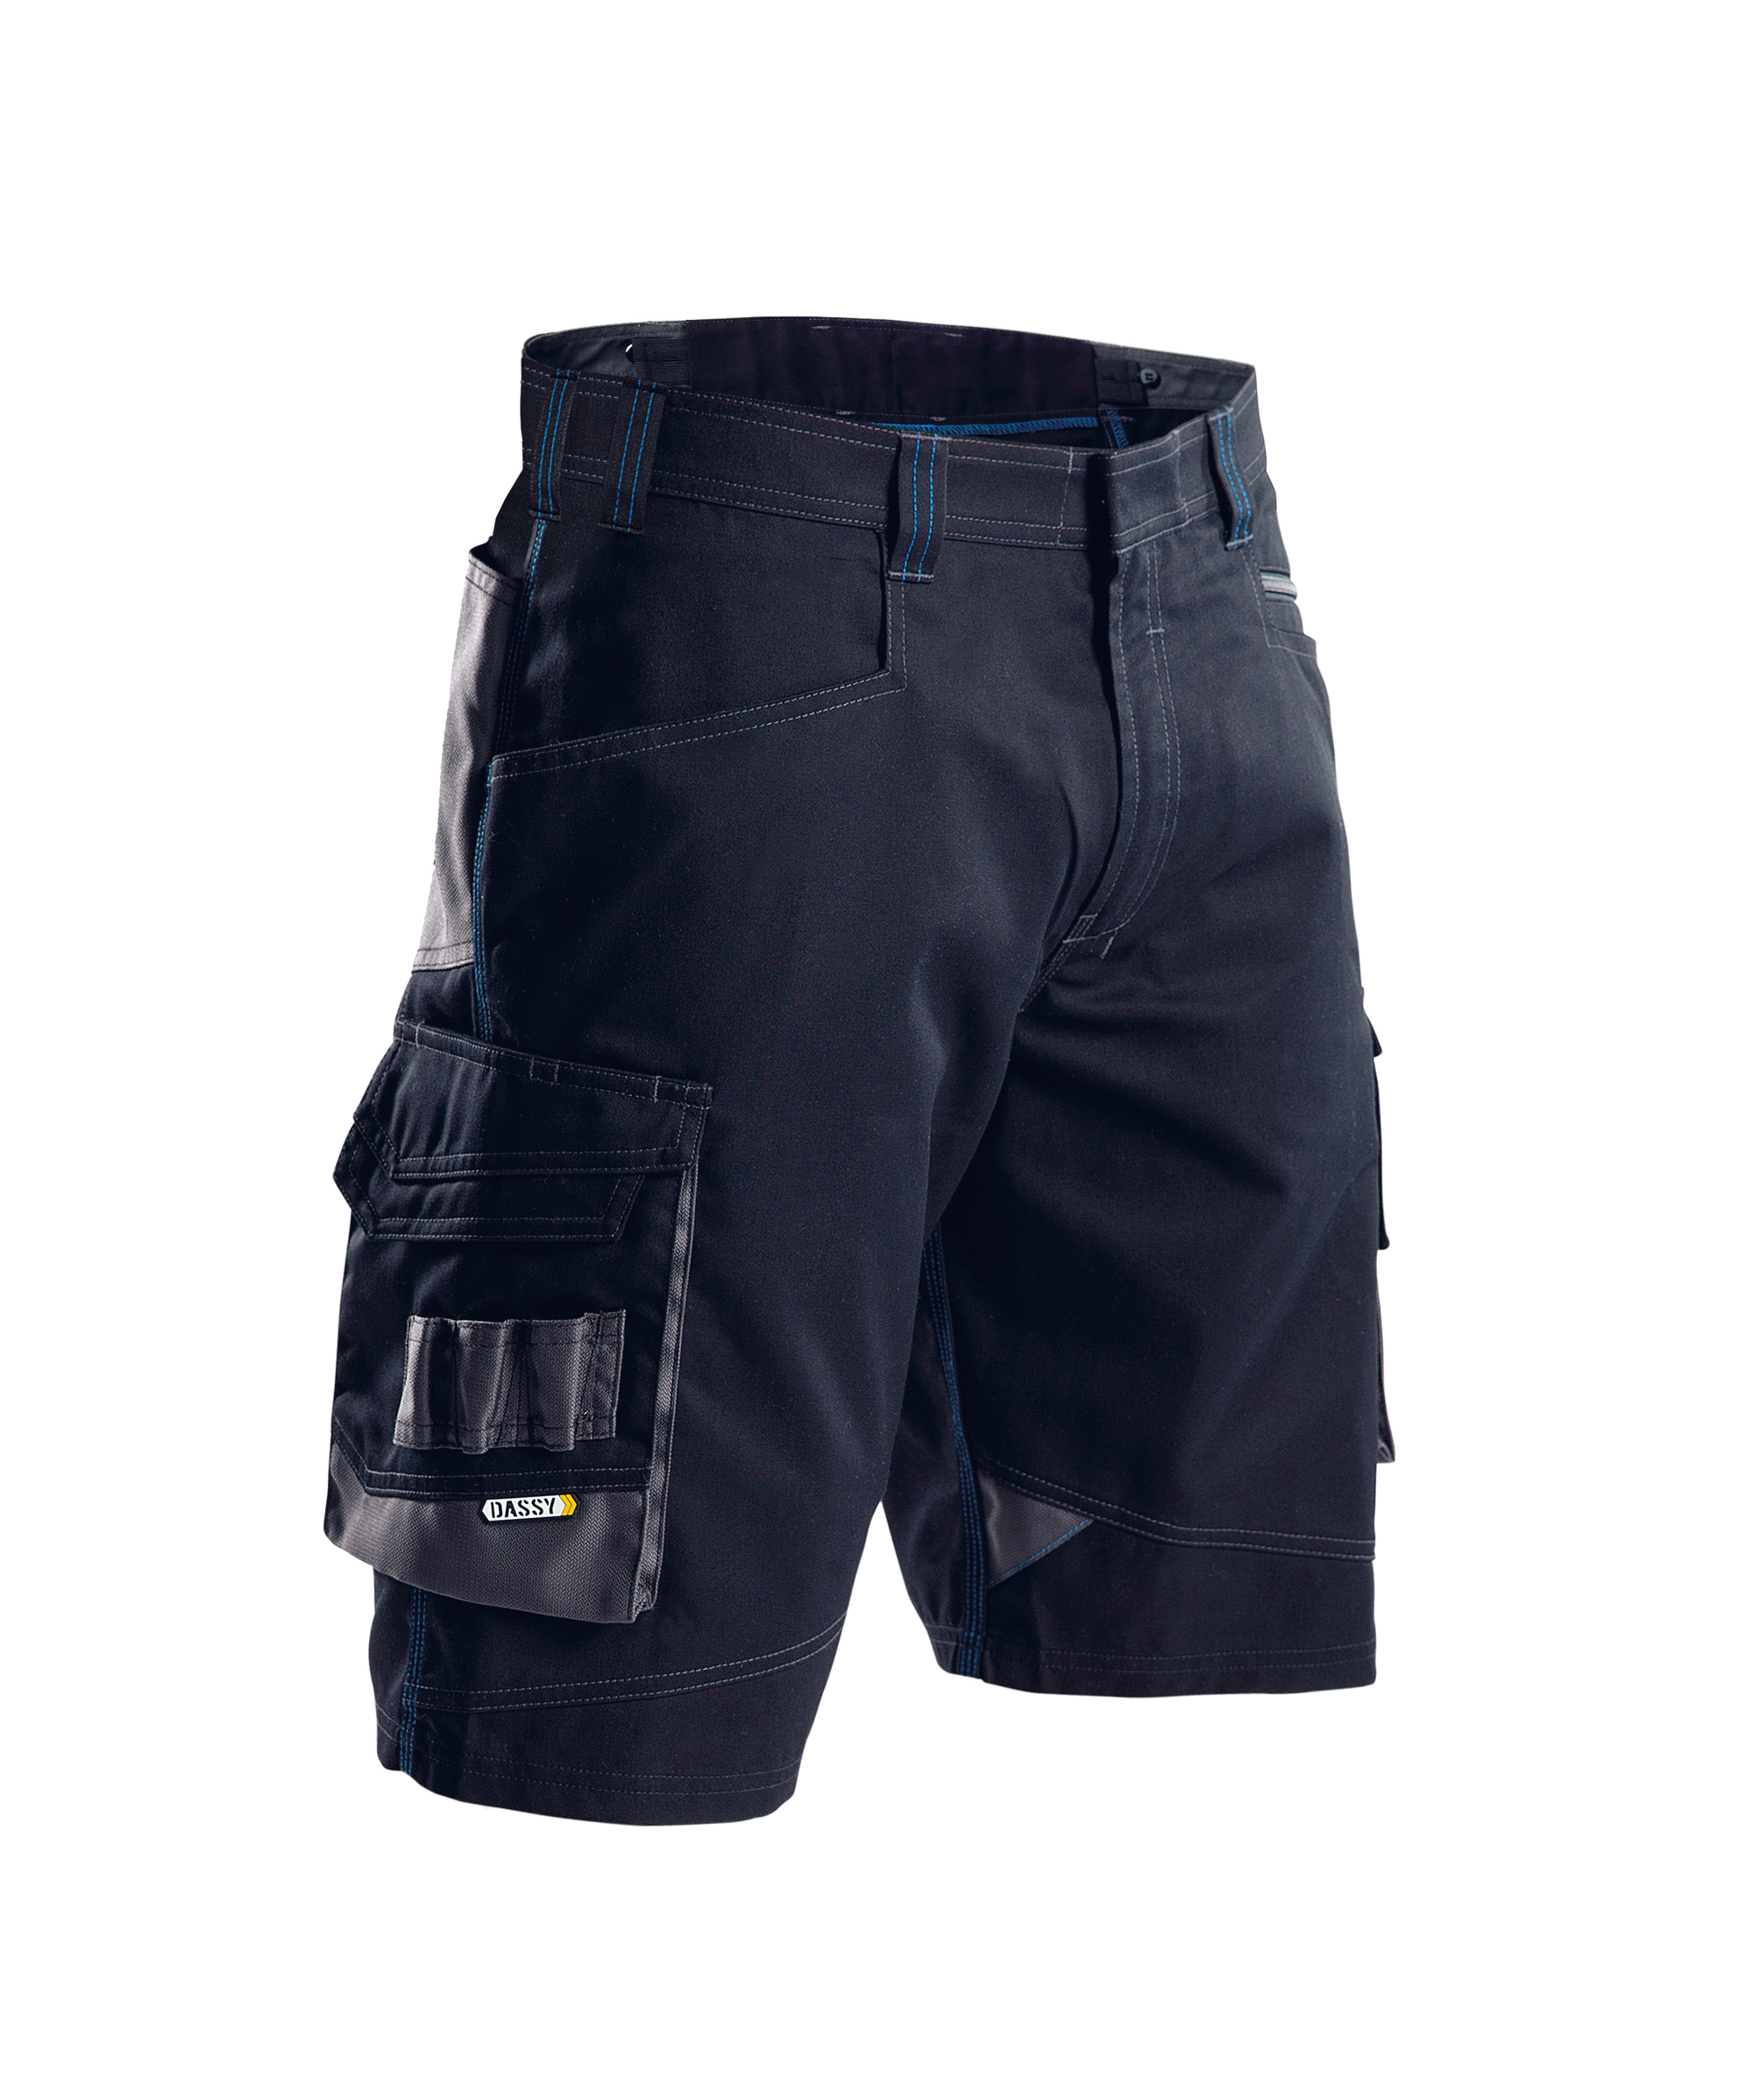 cosmic_two-tone-work-shorts_midnight-blue-anthracite-grey_side.jpg